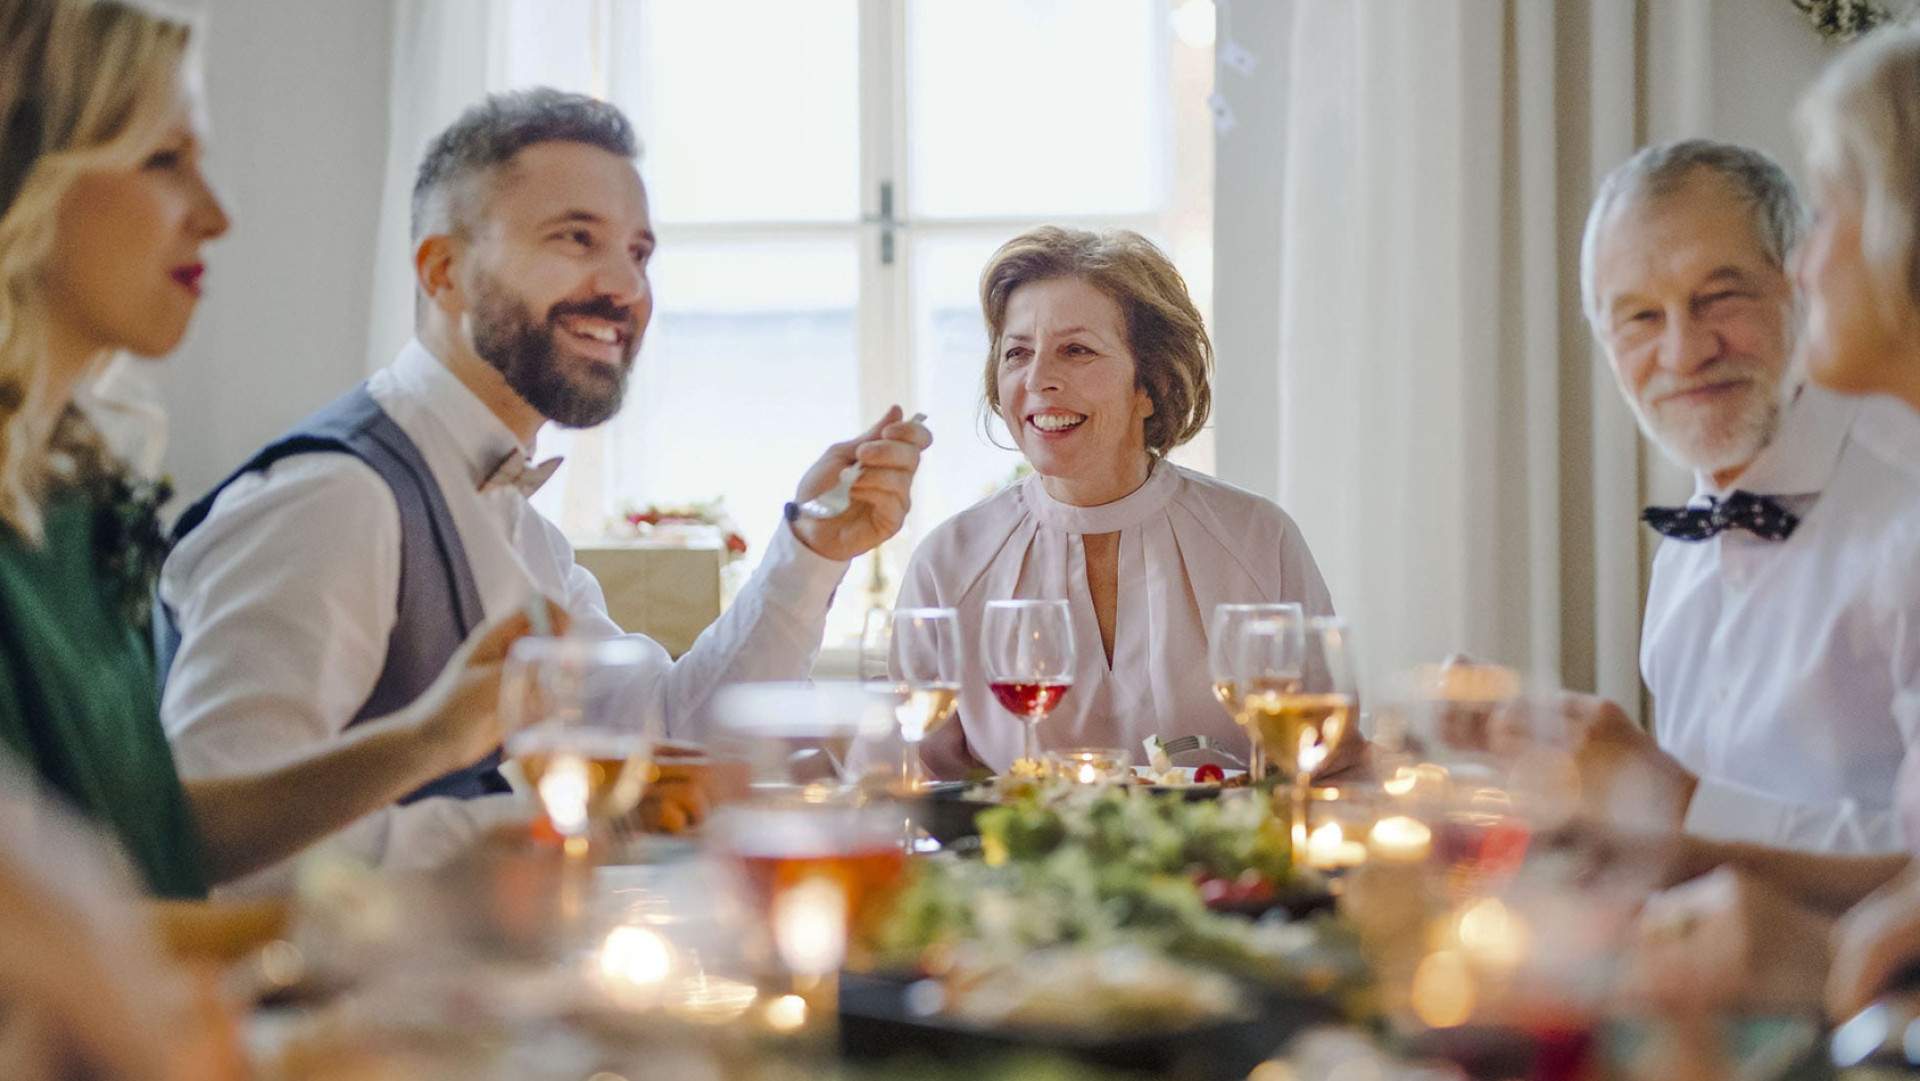 A moment of sharing around a family meal, a well laid table and a good glass of wine. Moments that perfectly illustrate the French way of life.